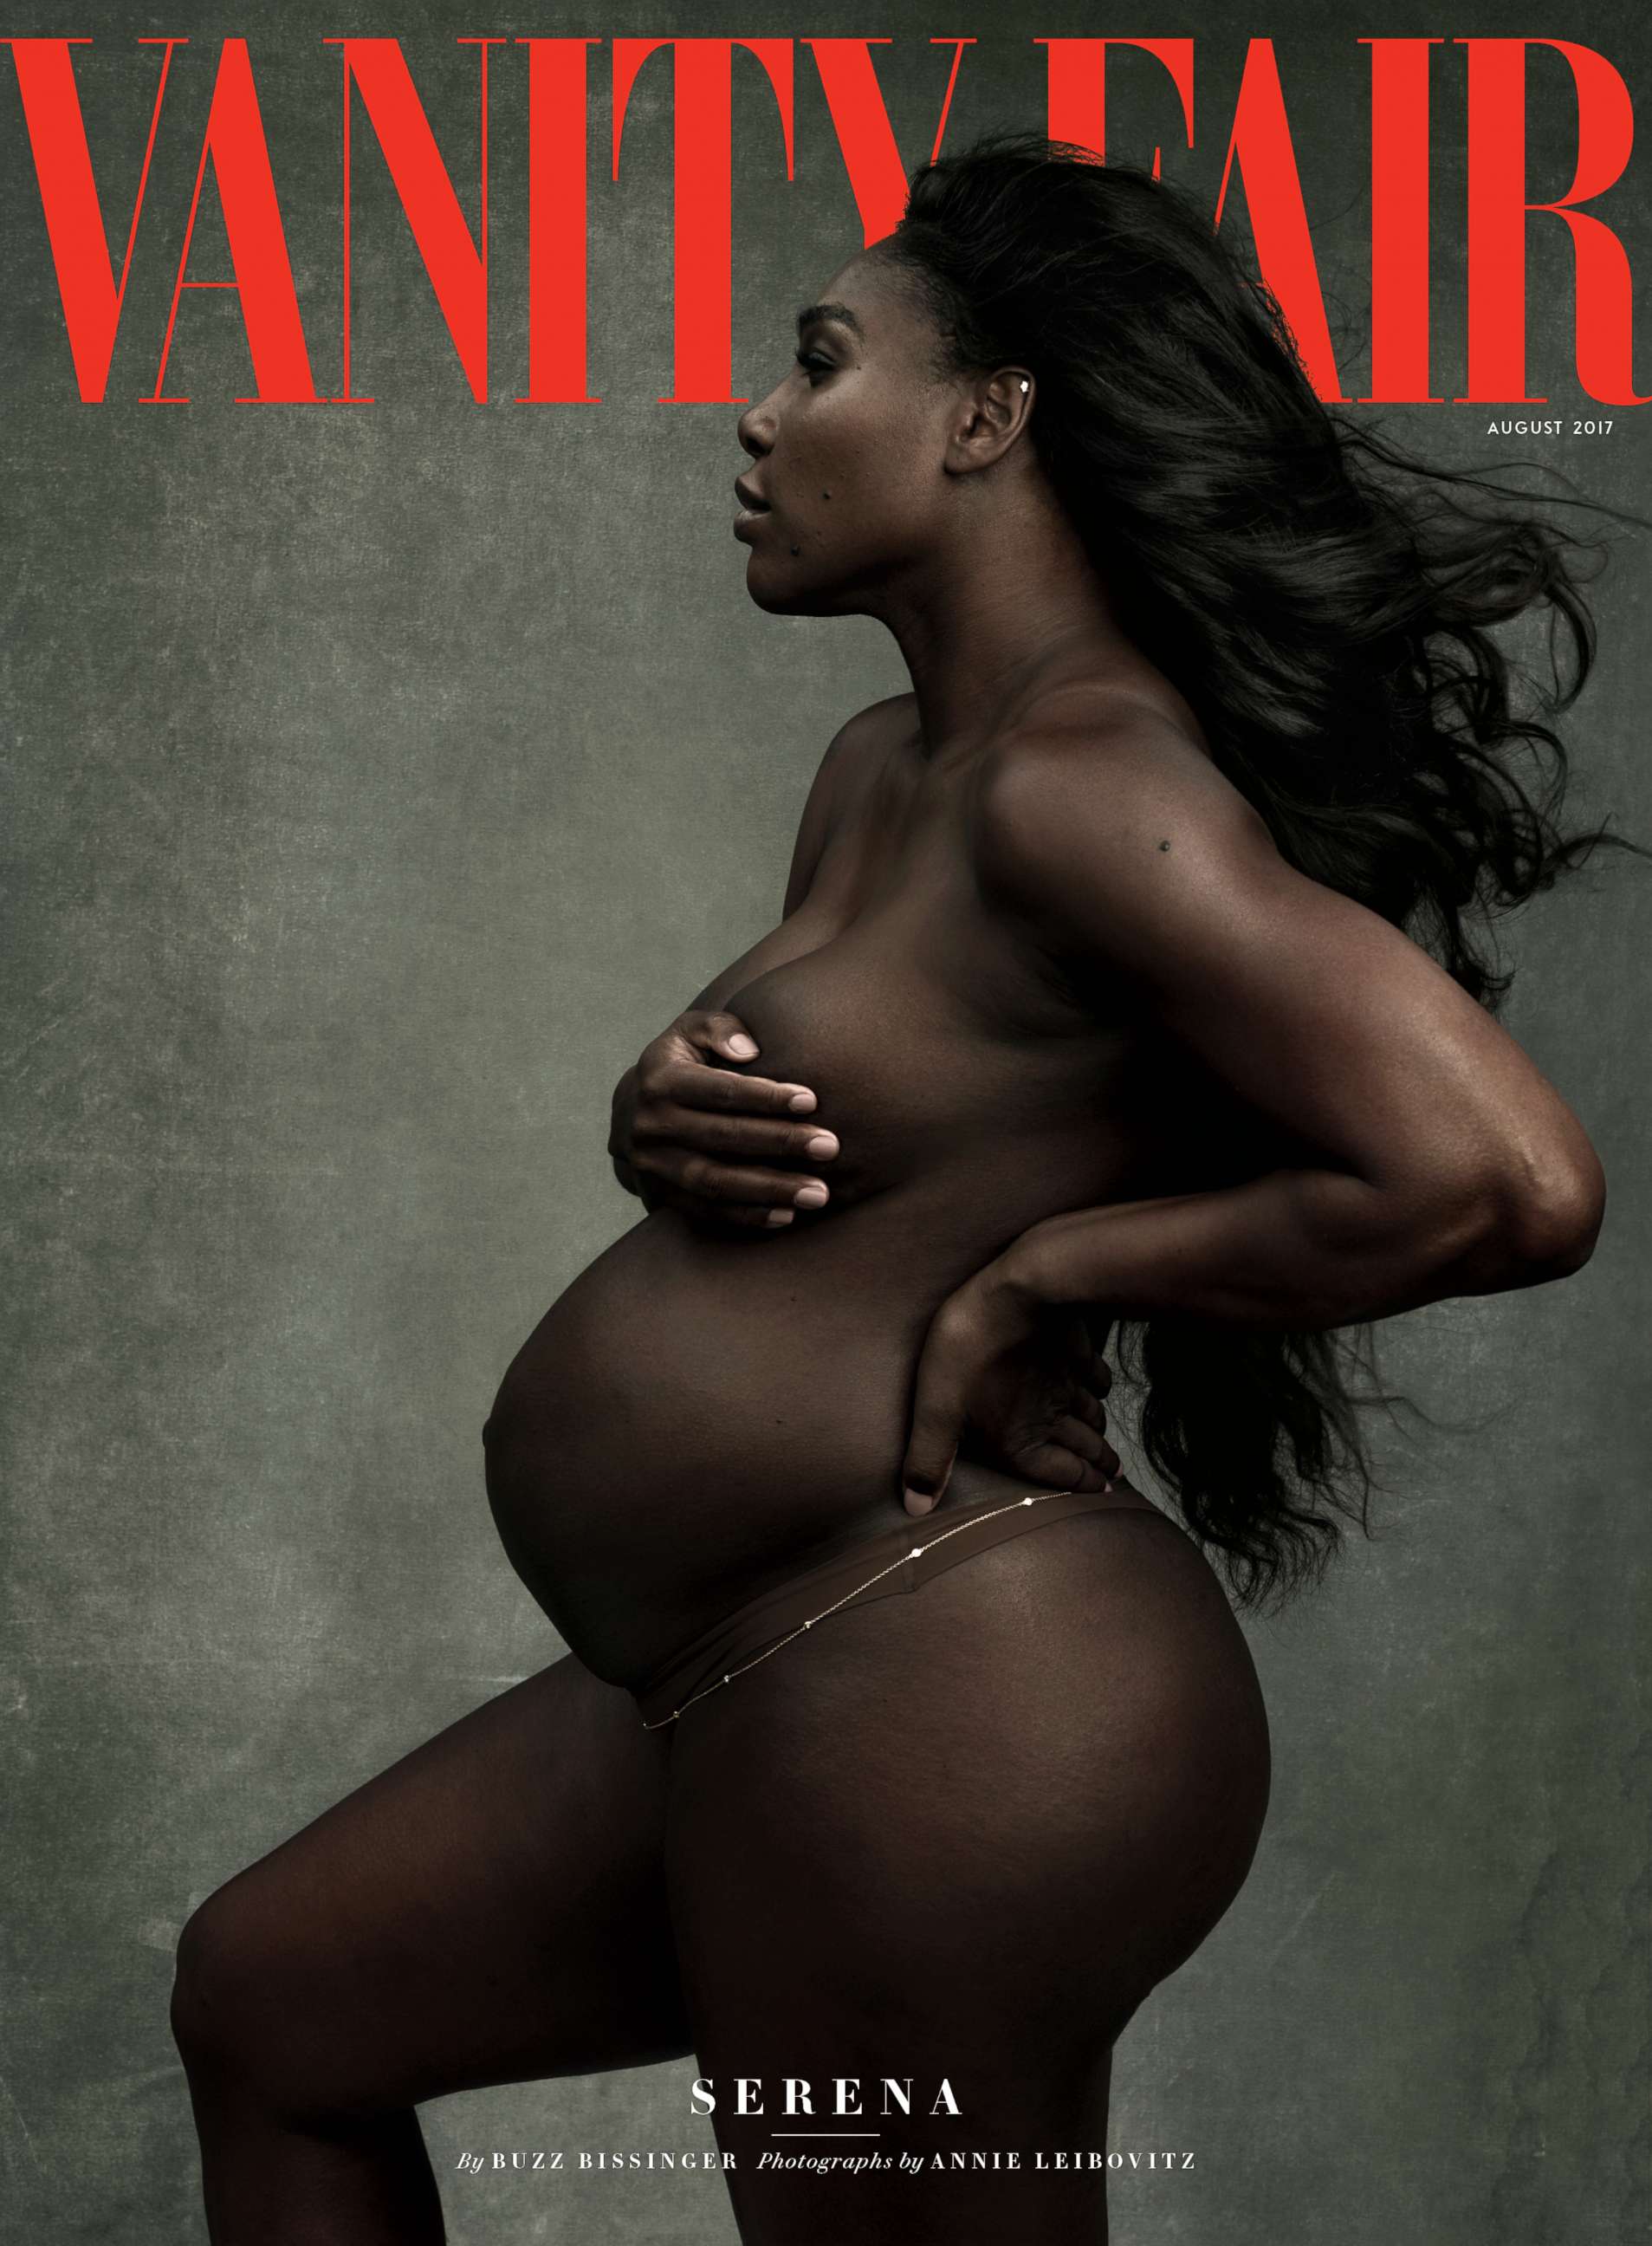 Serena Williams poses nude on cover of Vanity Fair, talks tennis after the  baby - ABC News